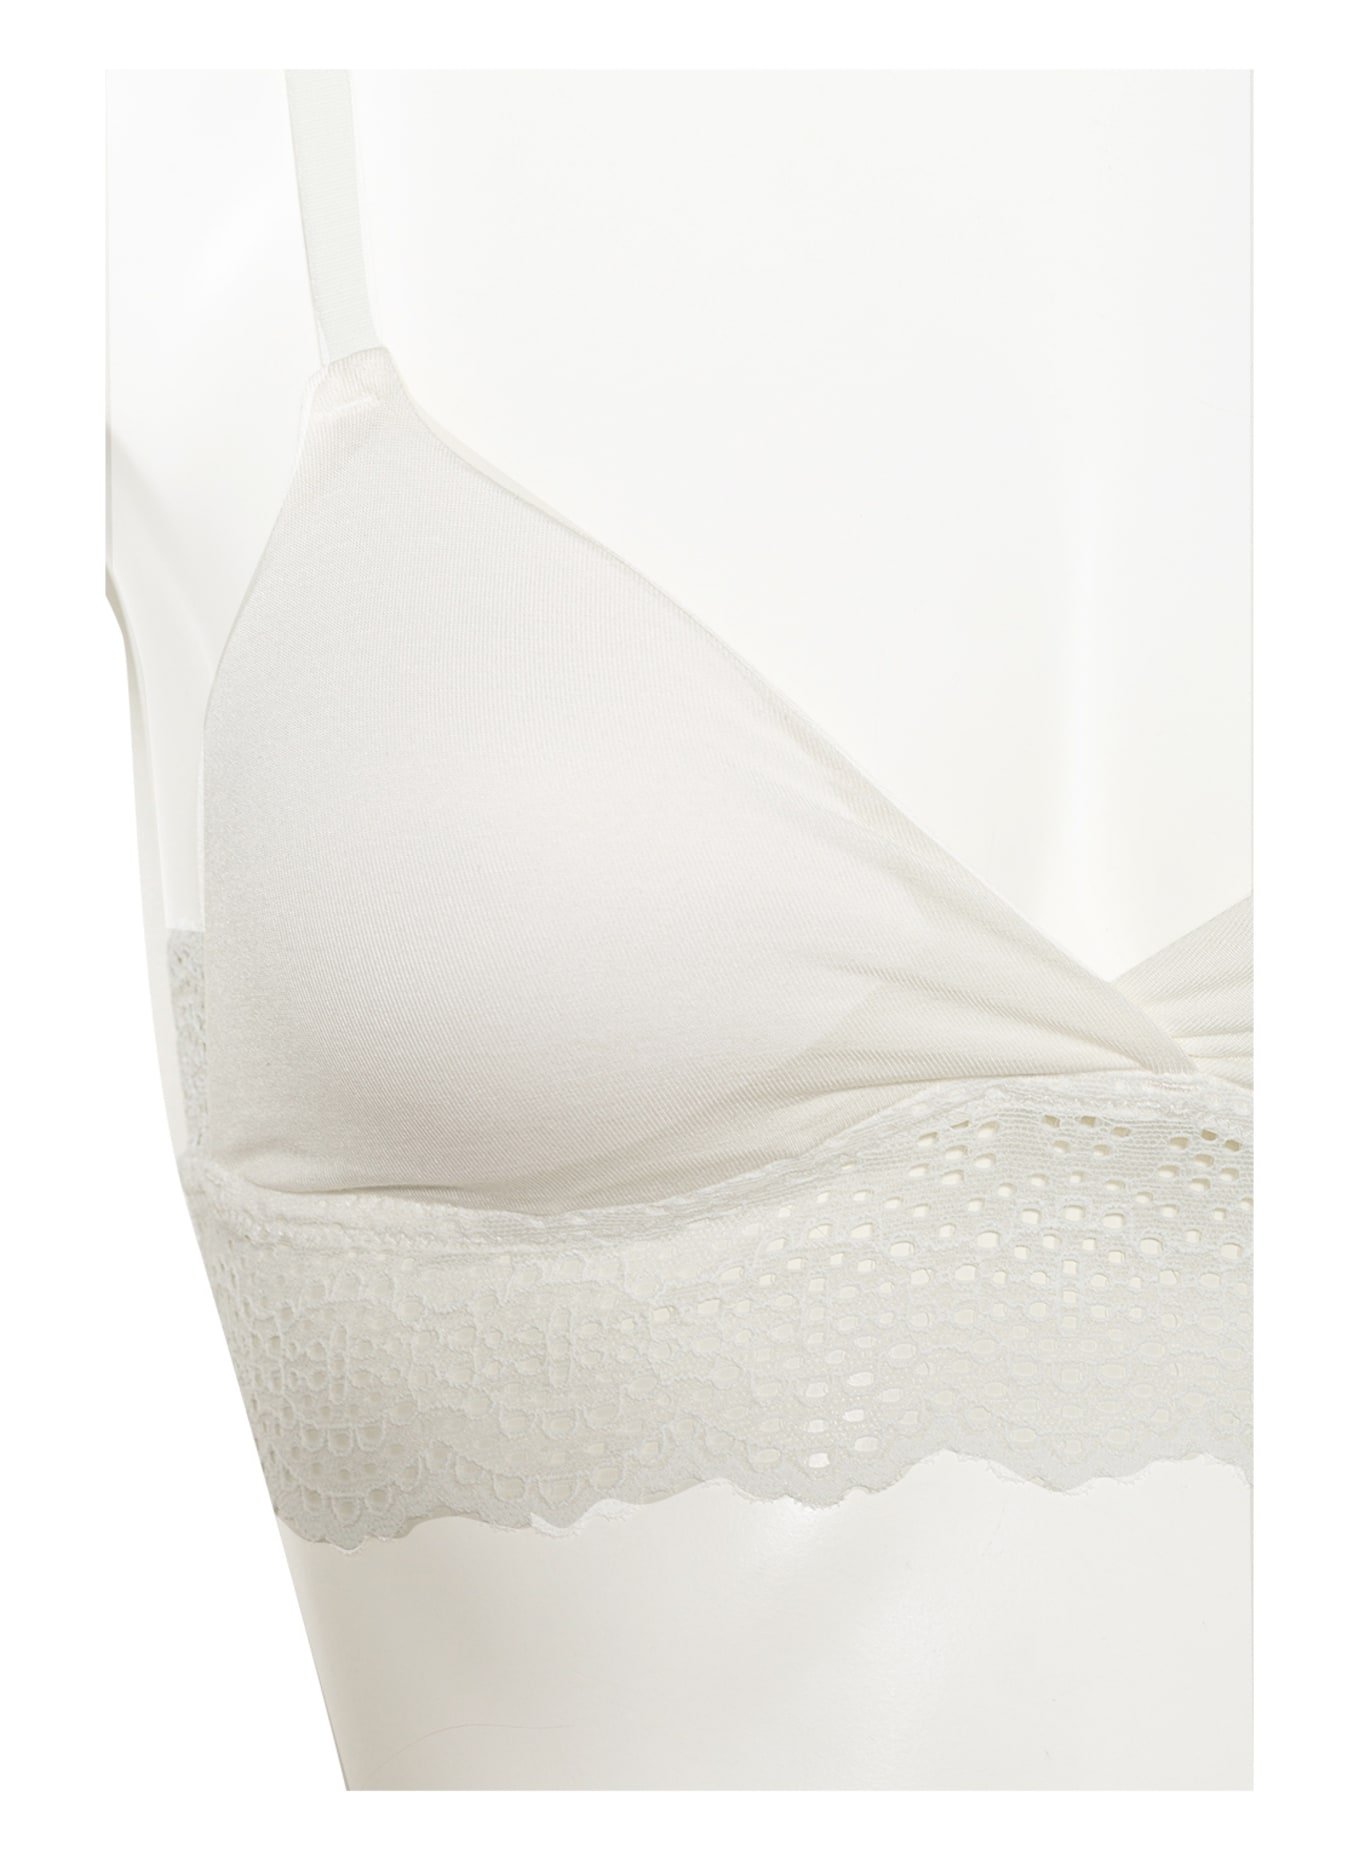 Skiny Triangel-BH EVERY DAY BAMBOO LACE, Farbe: WEISS (Bild 4)